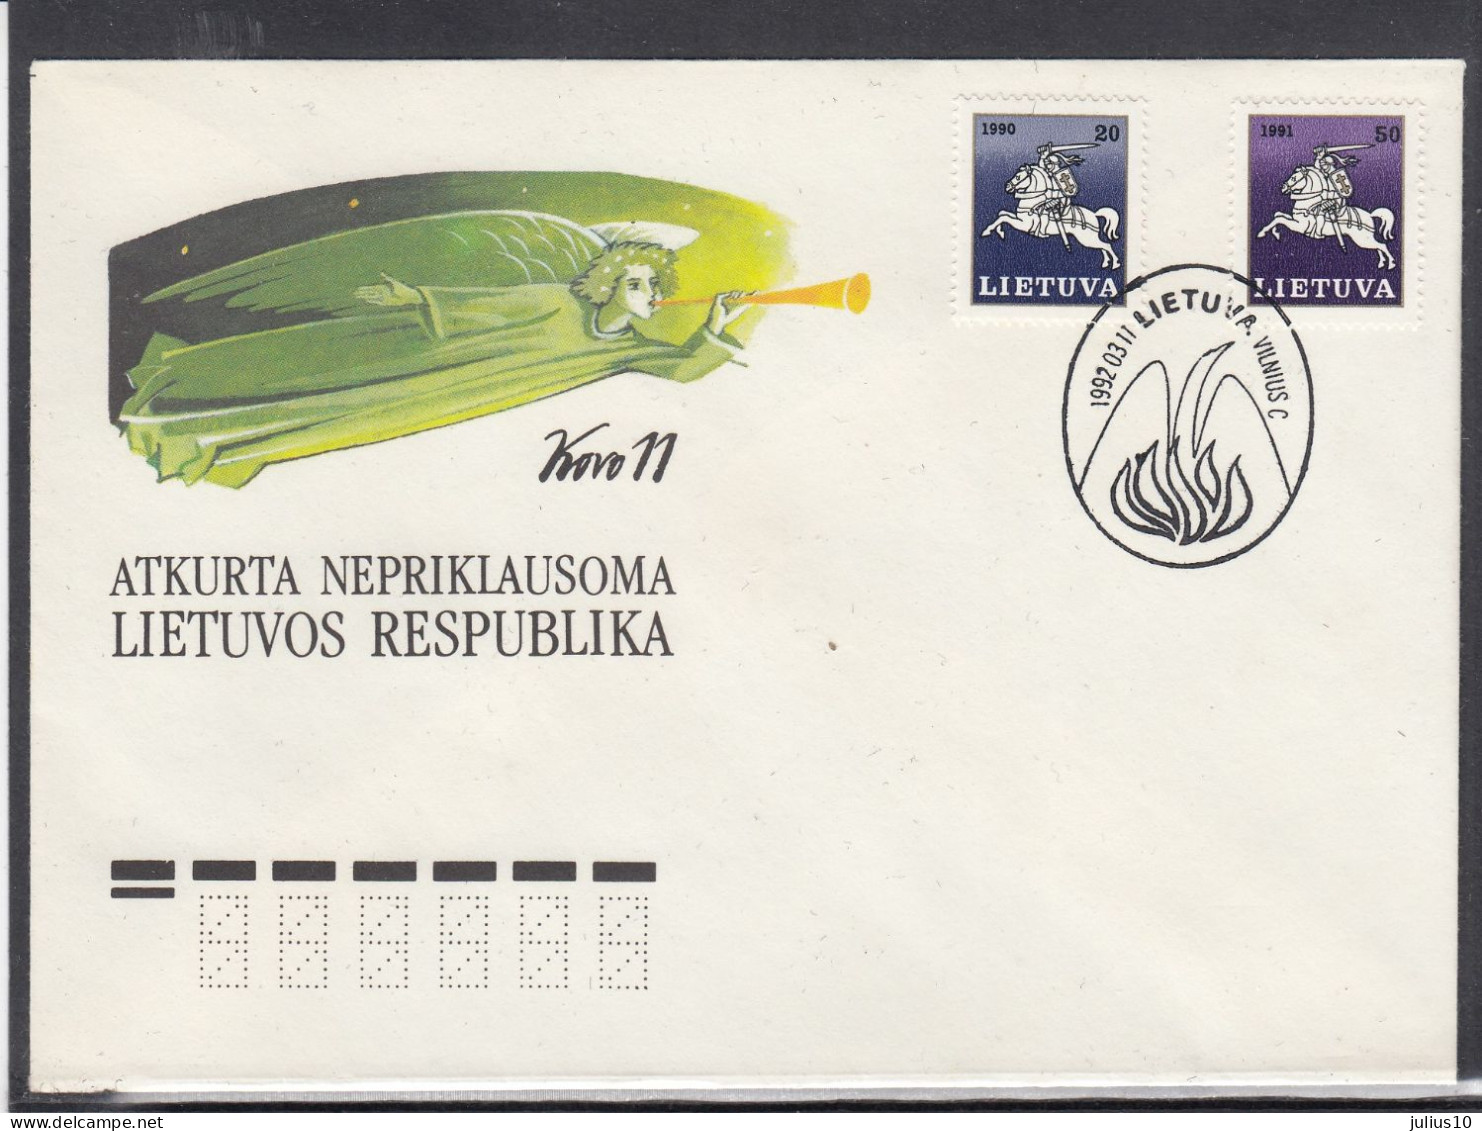 LITHUANIA 1992 Cover Special Cancel Independance Anniversary #LTV249 - Lithuania